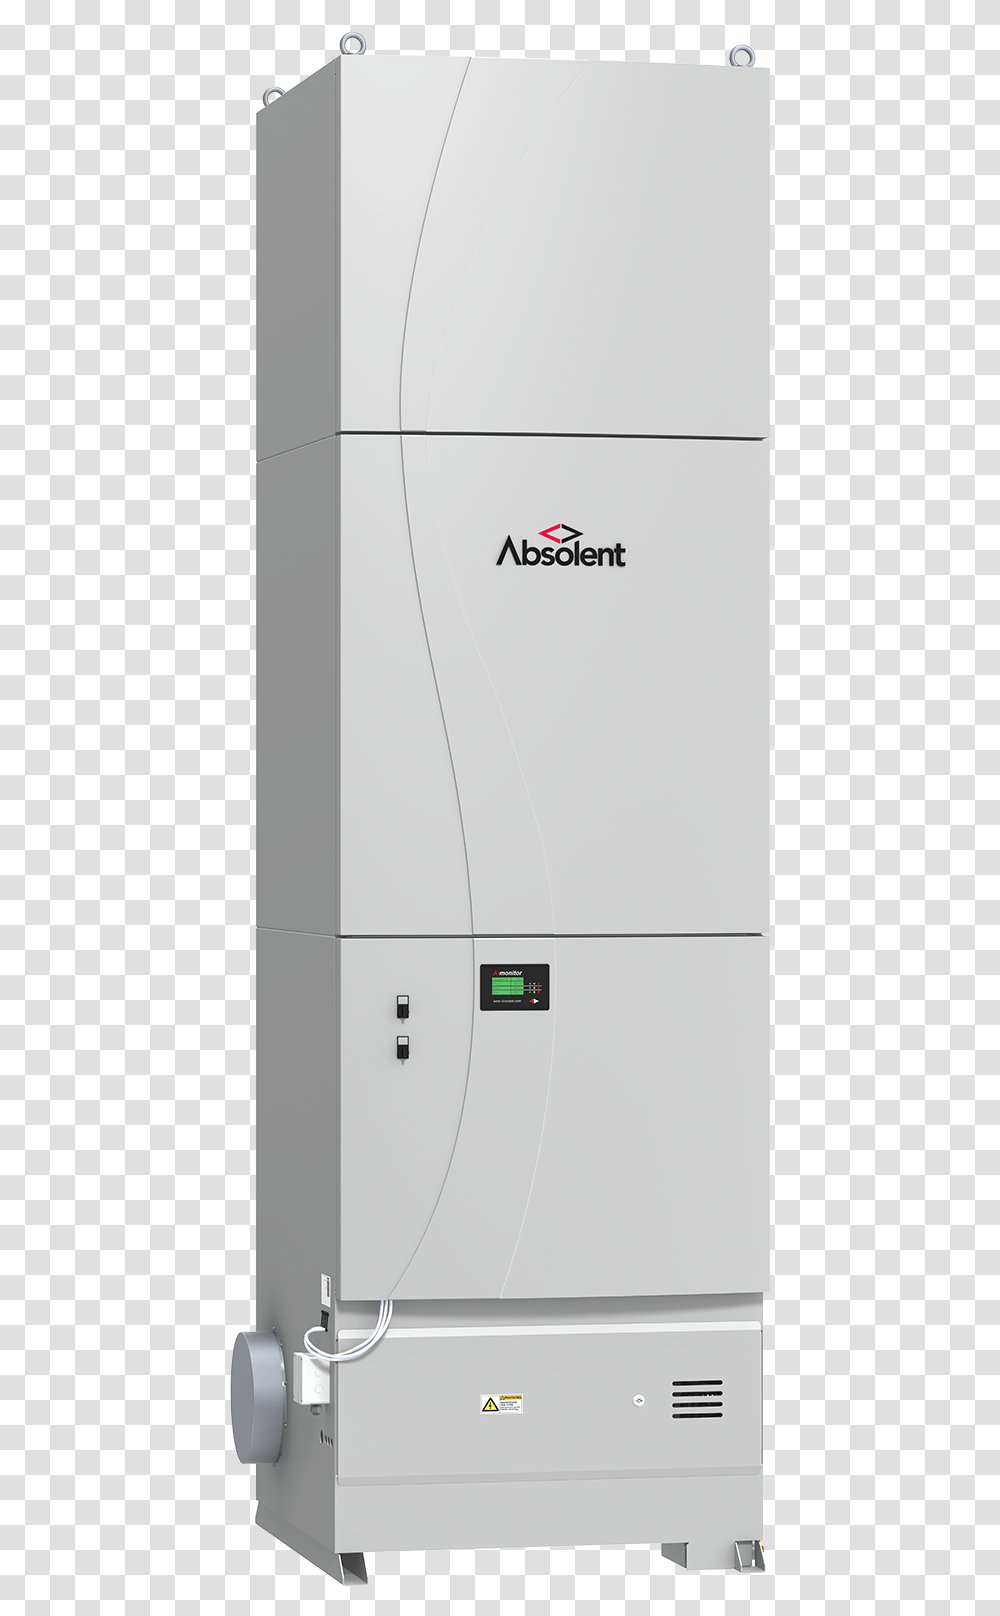 Absolent A Smoke, Appliance, Heater, Space Heater, Dishwasher Transparent Png